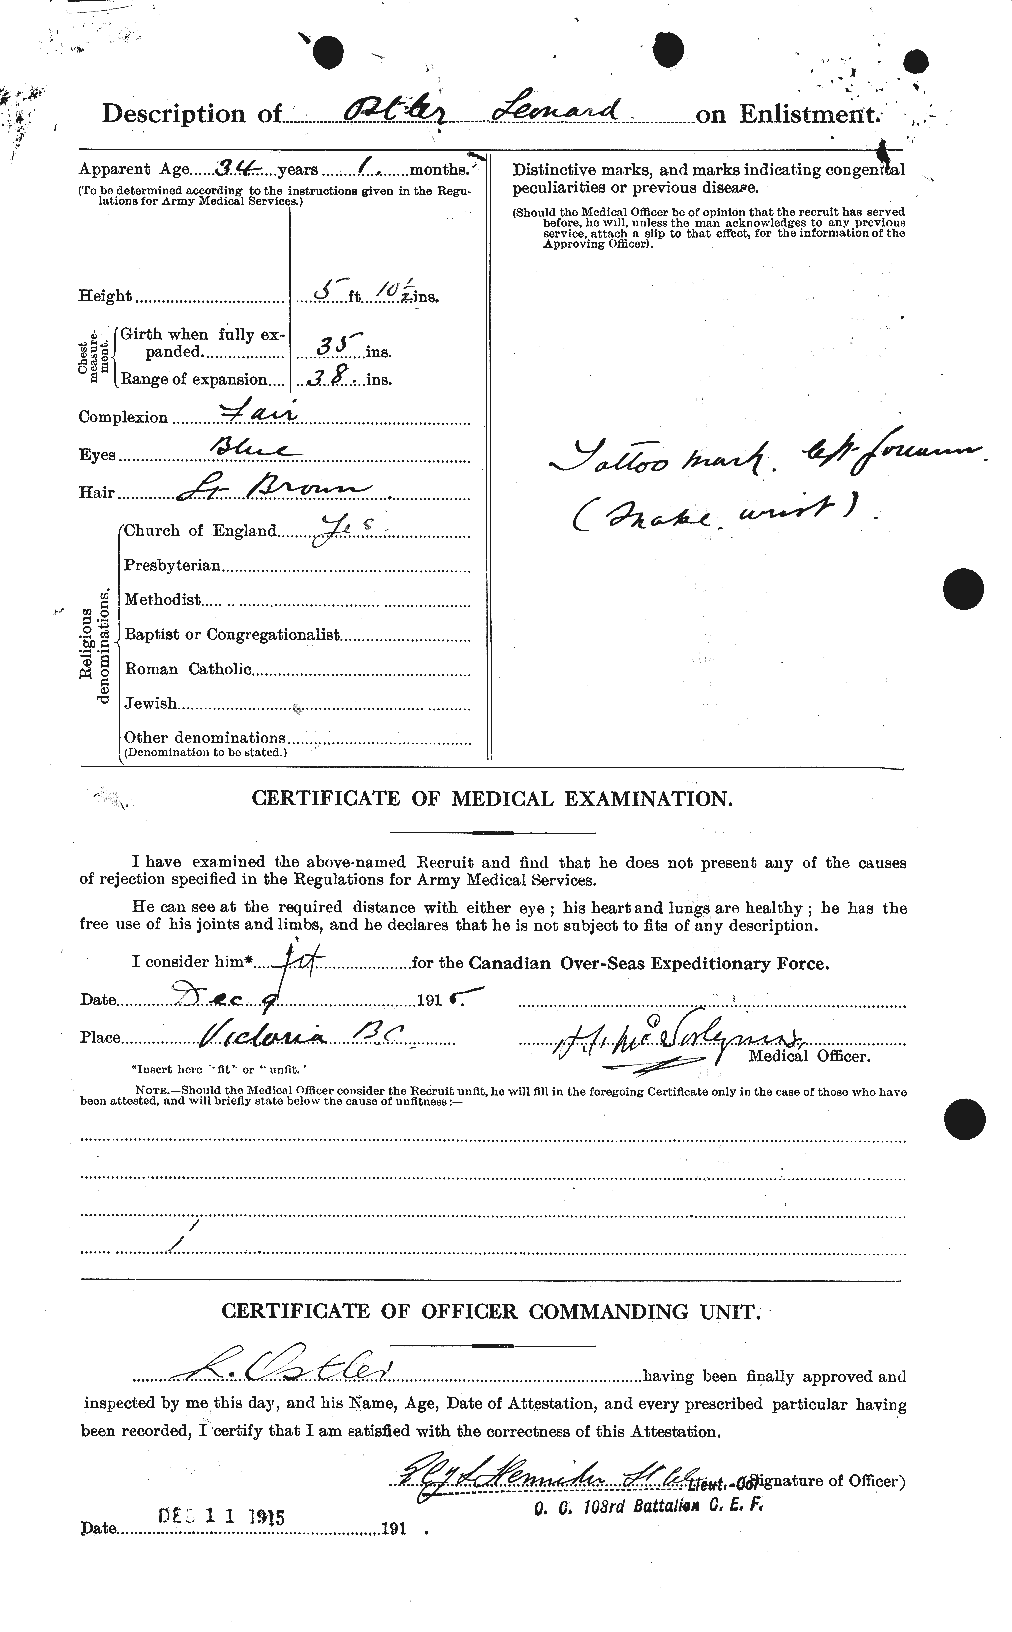 Personnel Records of the First World War - CEF 560231b